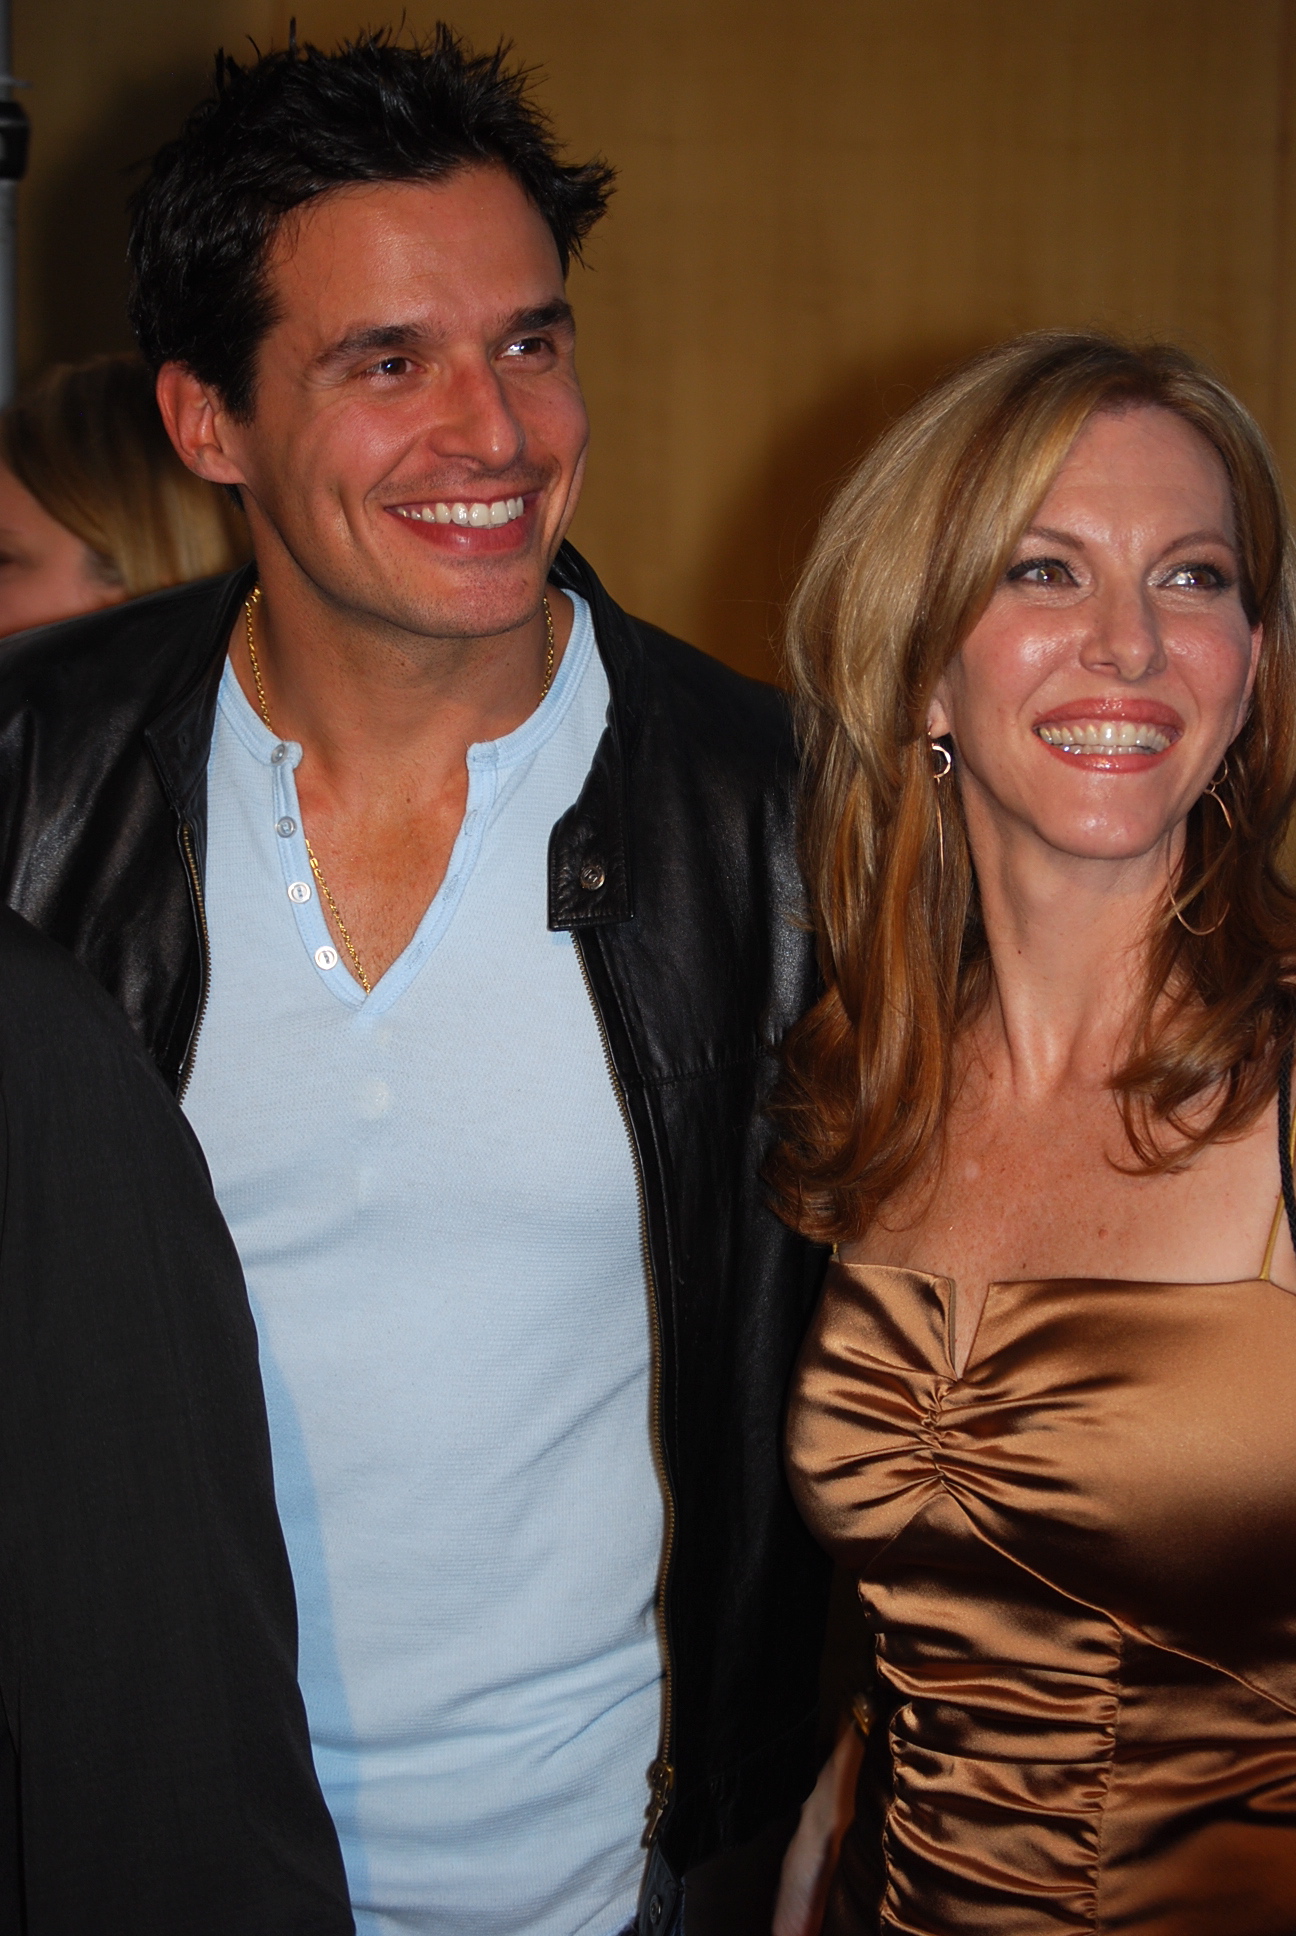 Antonio Sabato Jr. and Caia Coley arrive at opening night of the 2009 Beverly Hills Film Festival.